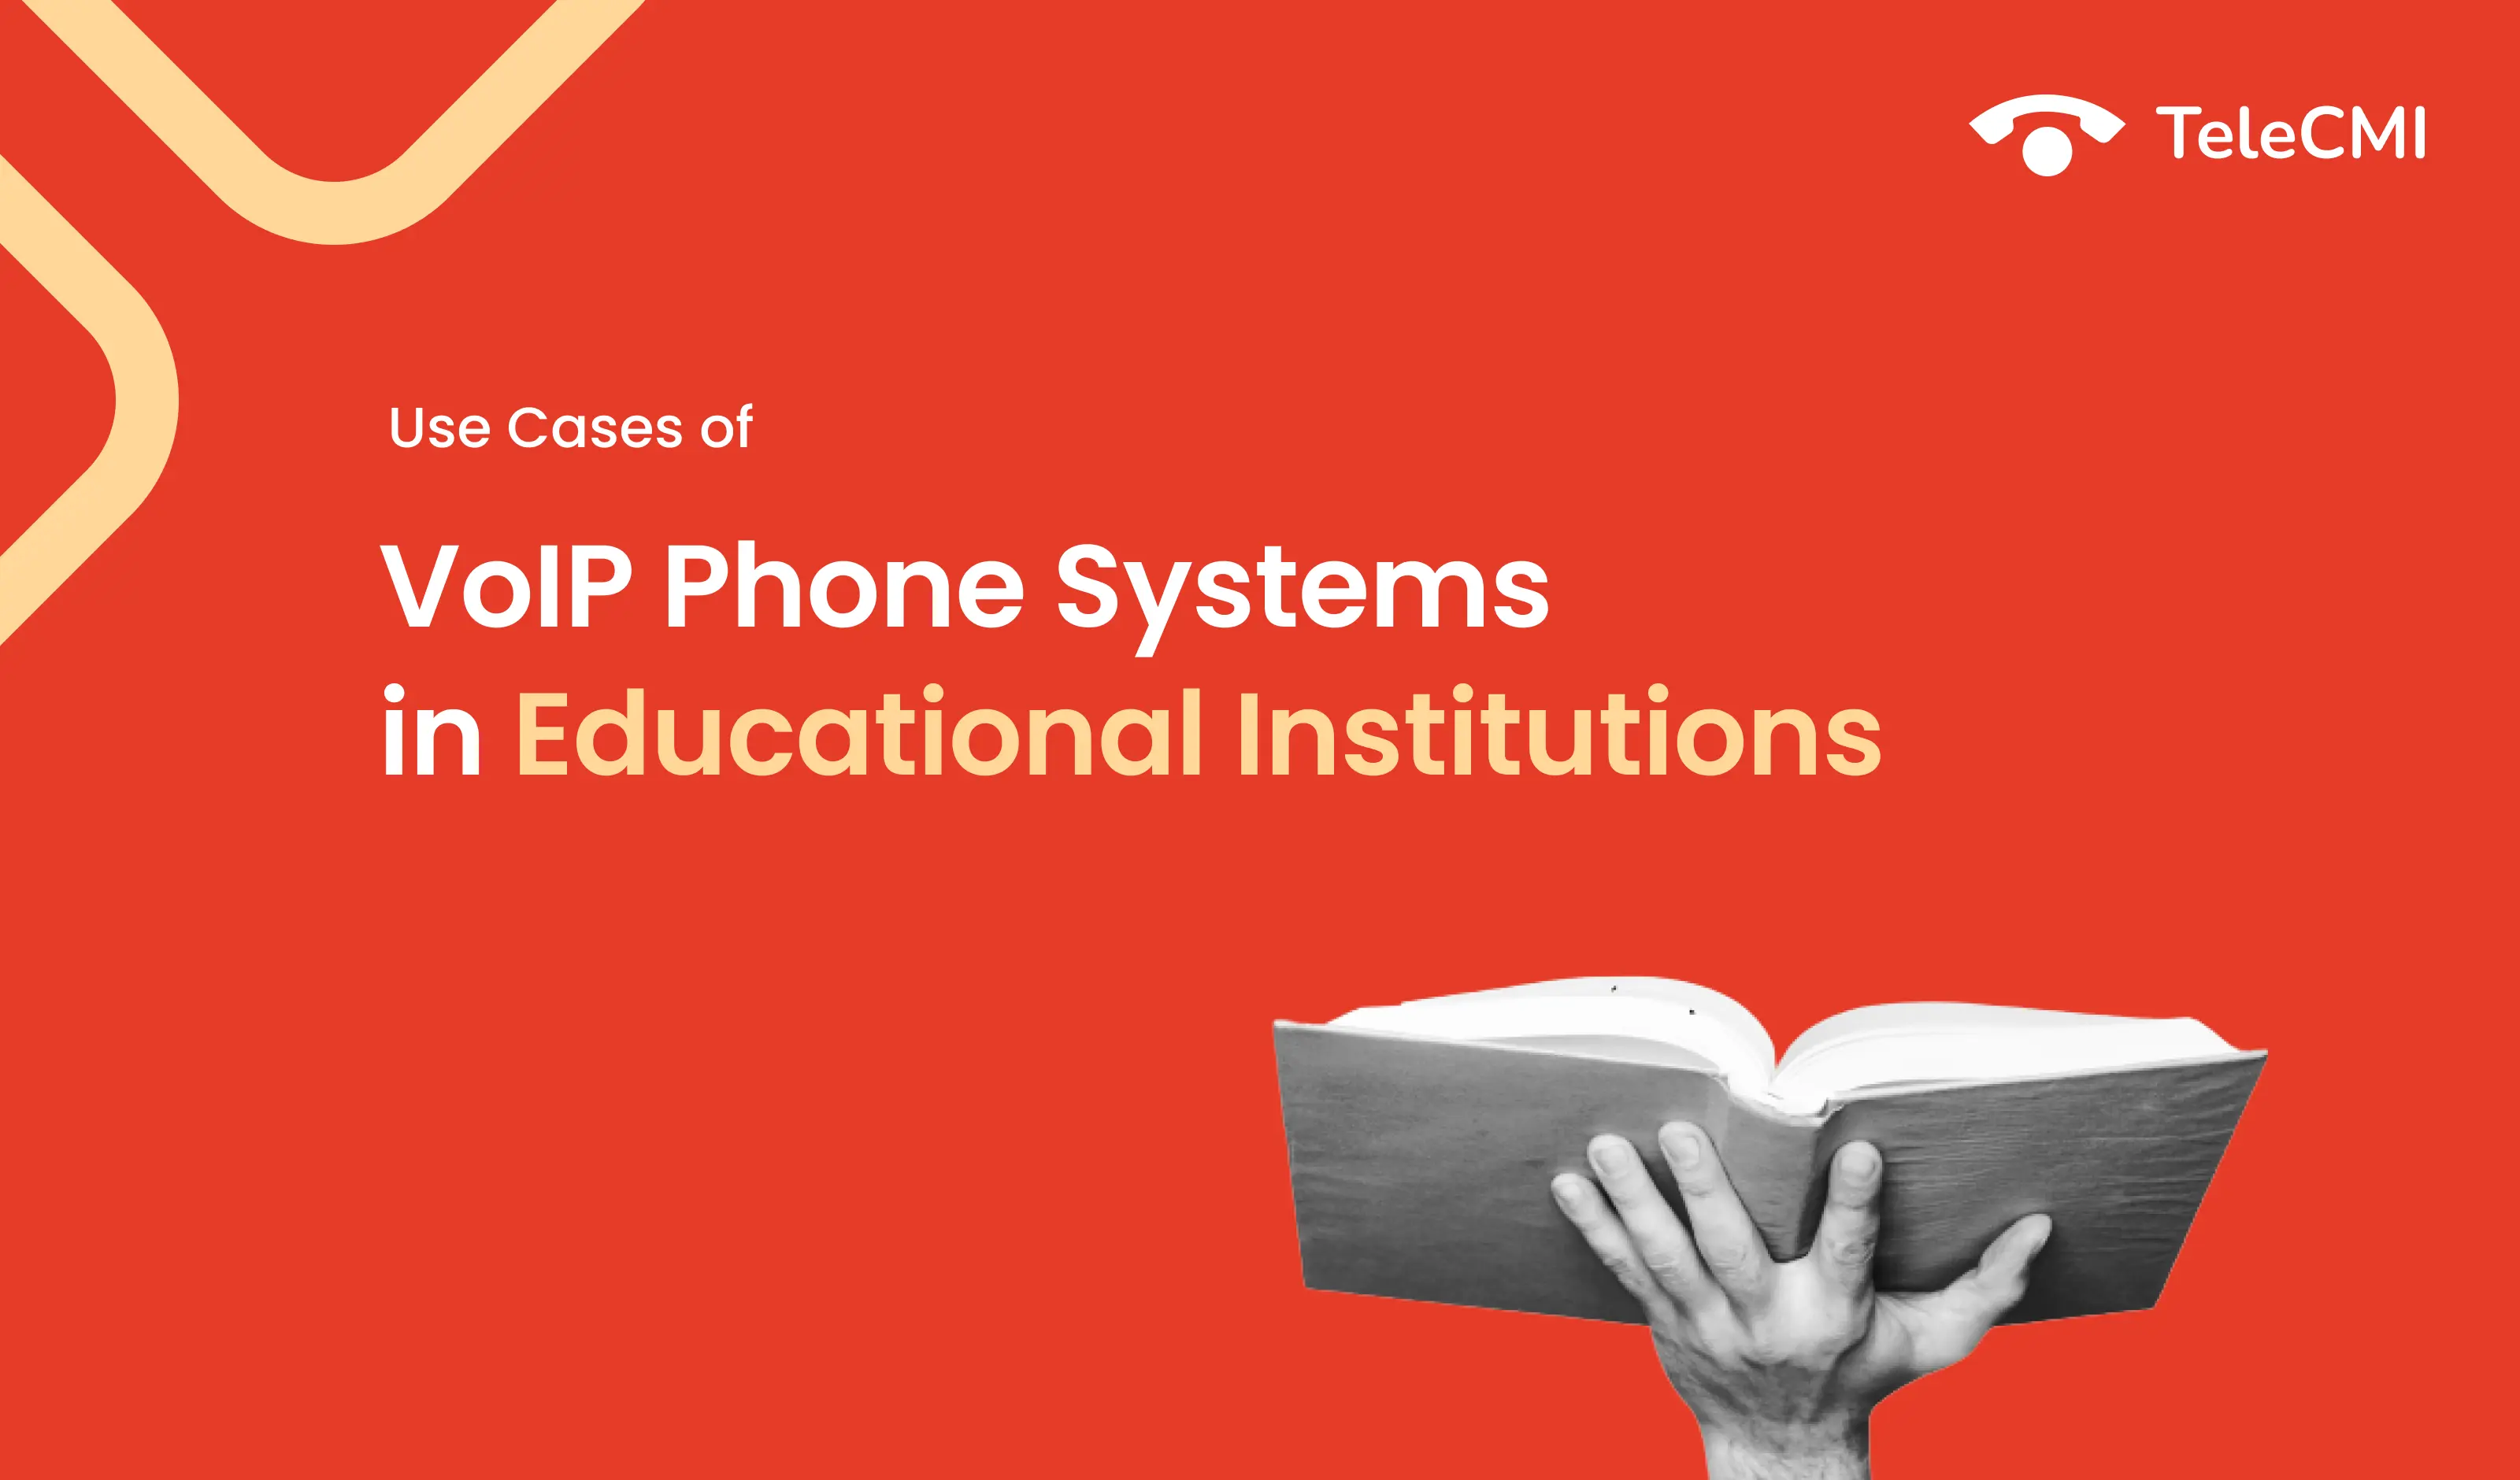 How are VoIP Phone Systems Transforming Educational Institutions?